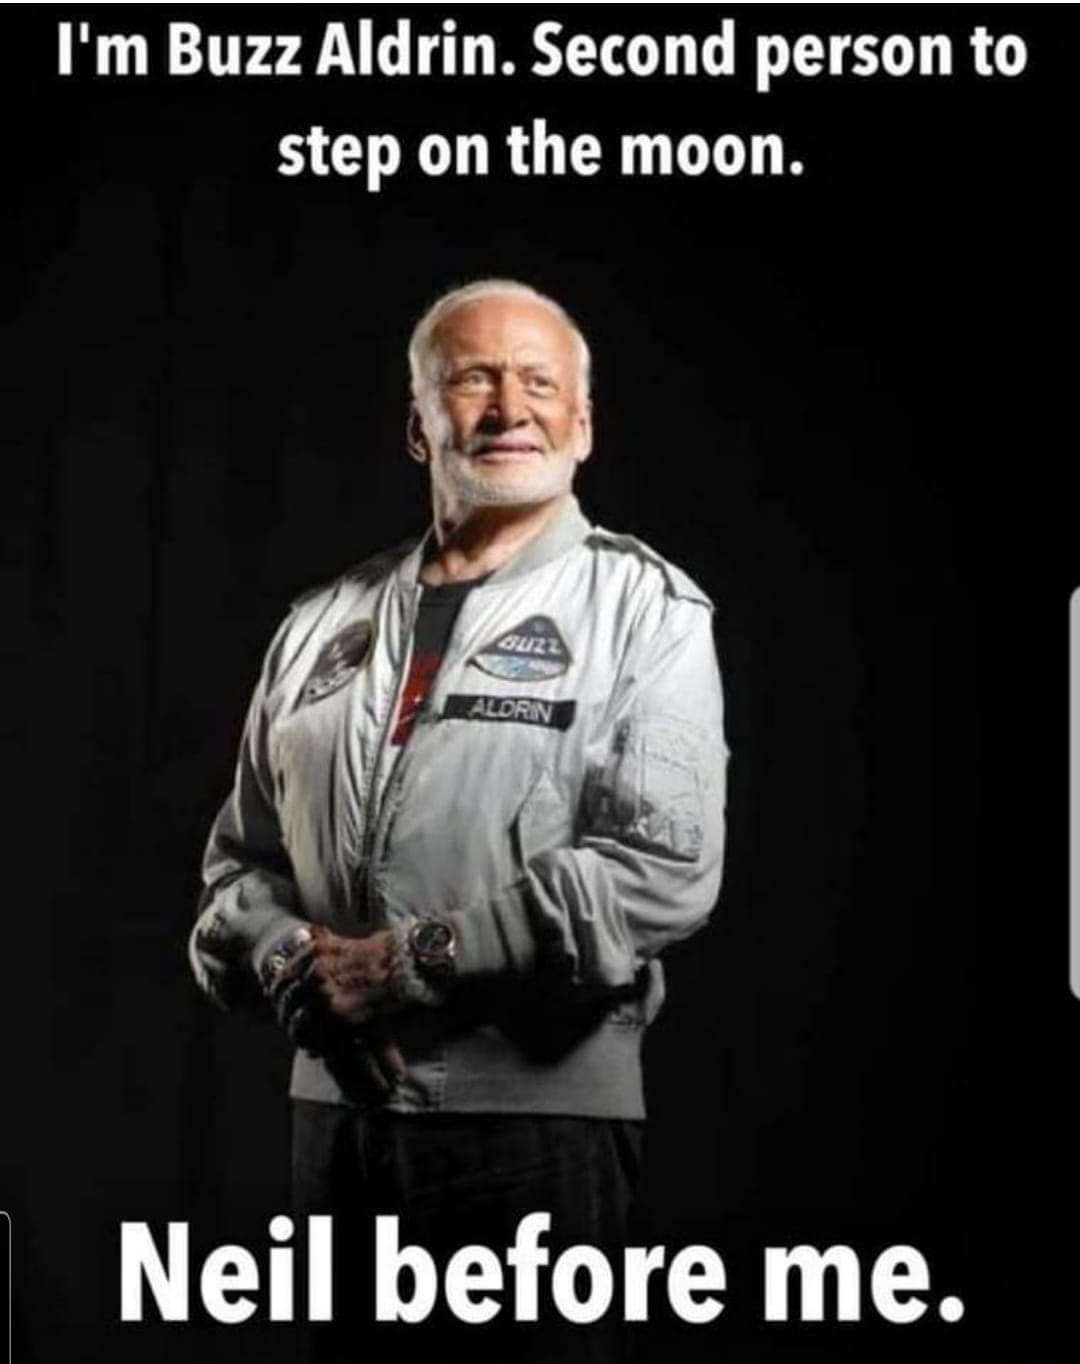 happy birthday buzz aldrin - I'm Buzz Aldrin. Second person to step on the moon. BuZ2 Alorin Neil before me.